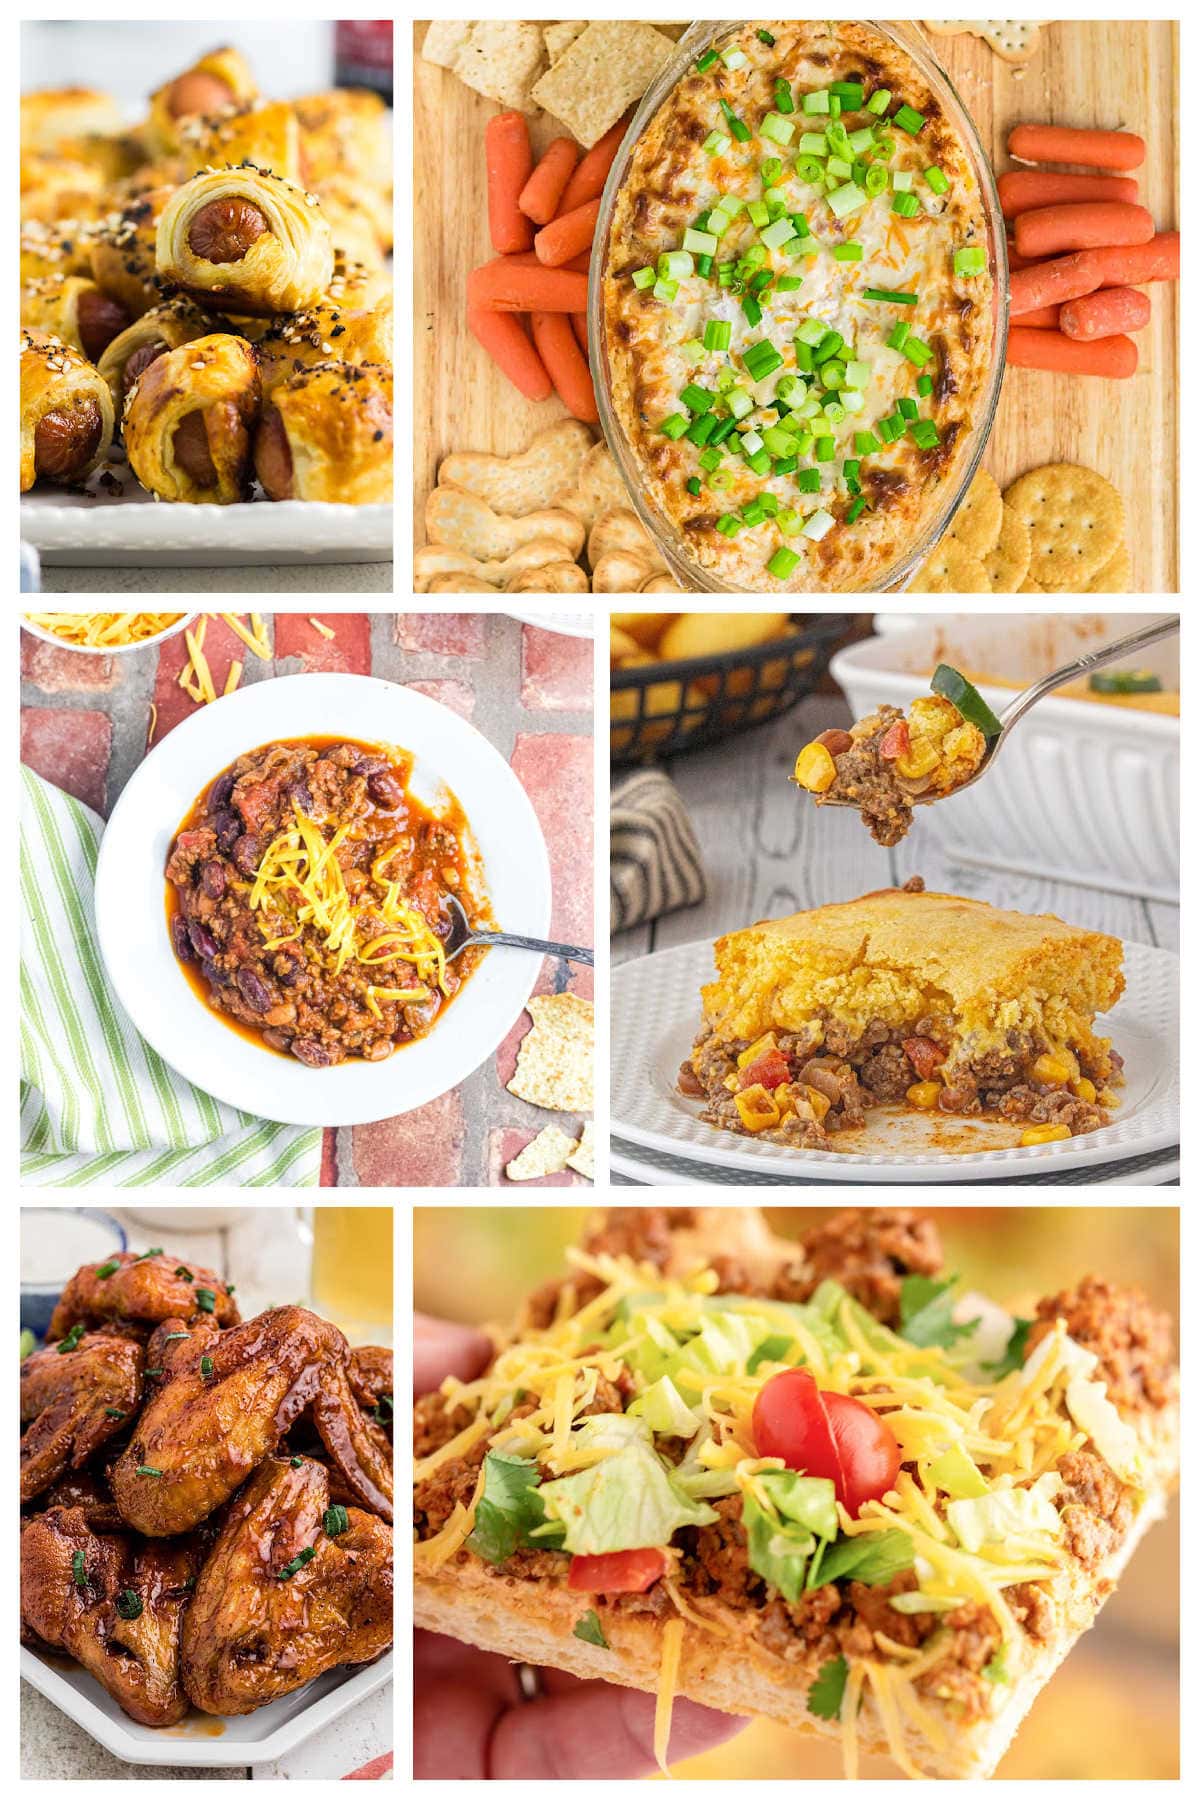 A collage of images from the Super Bowl tailgating recipes in this article.